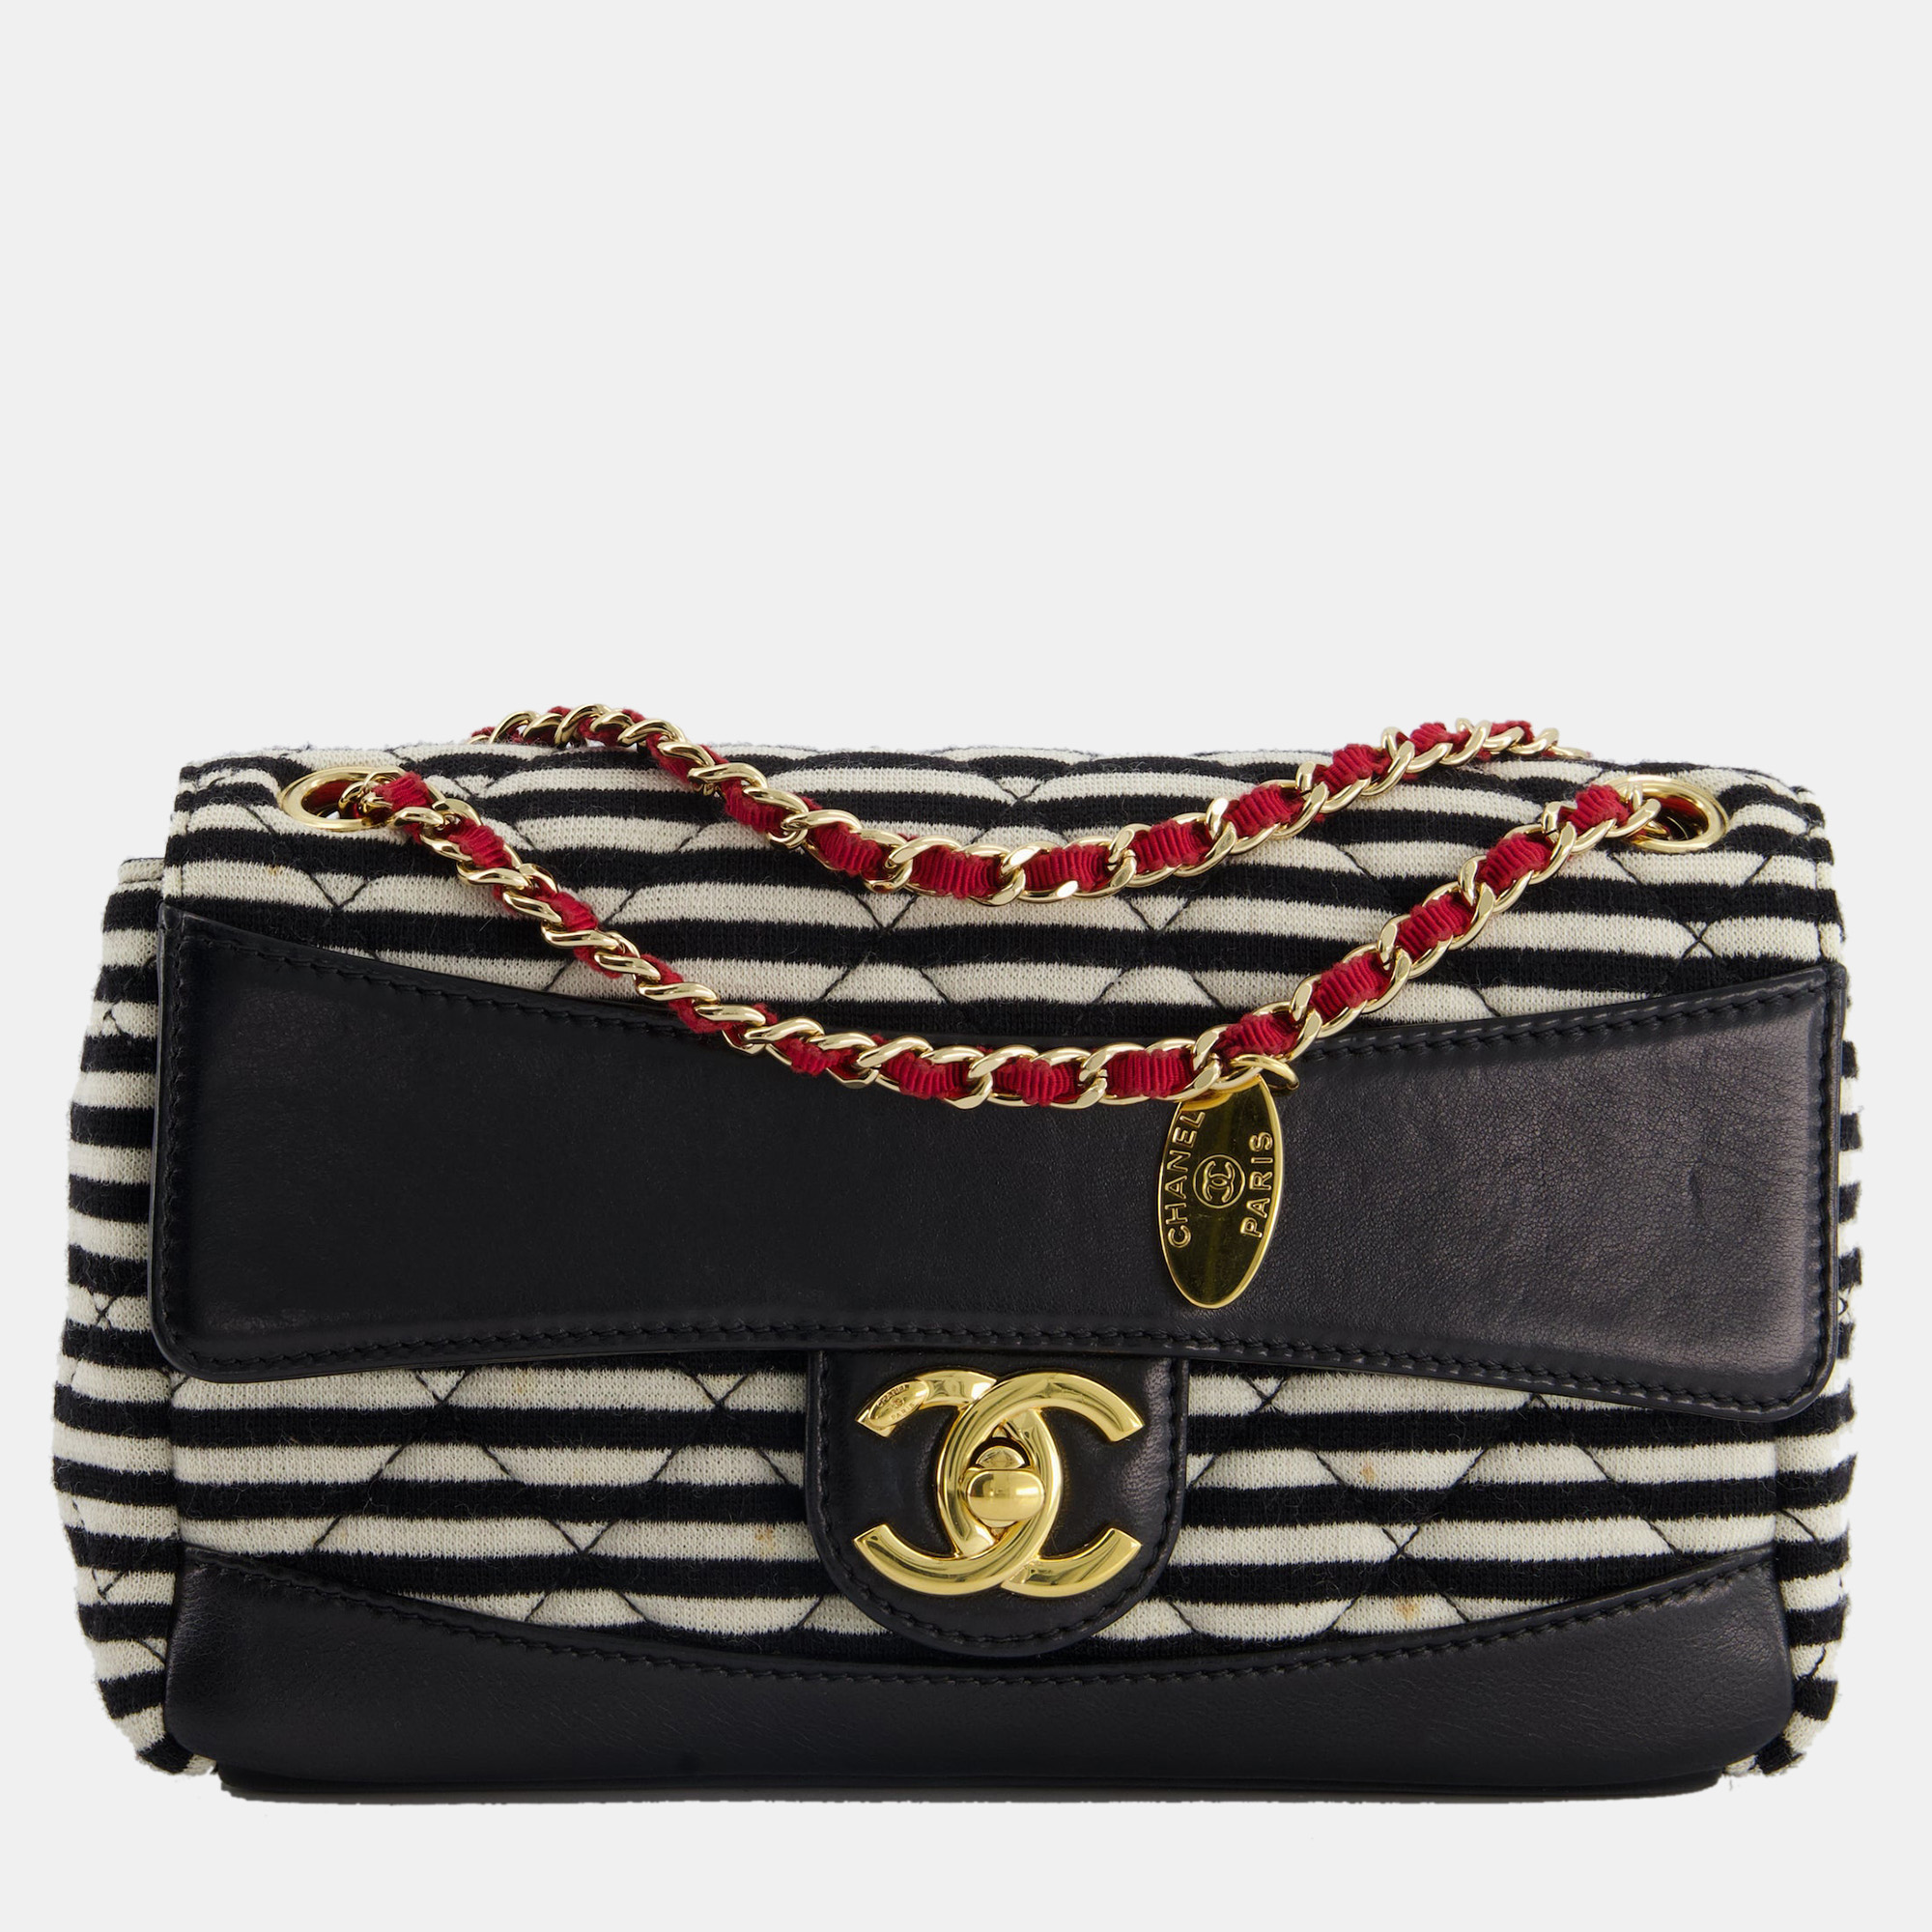 Chanel black and white mini rectangular jersey single flap bag with red chain detail and gold hardware